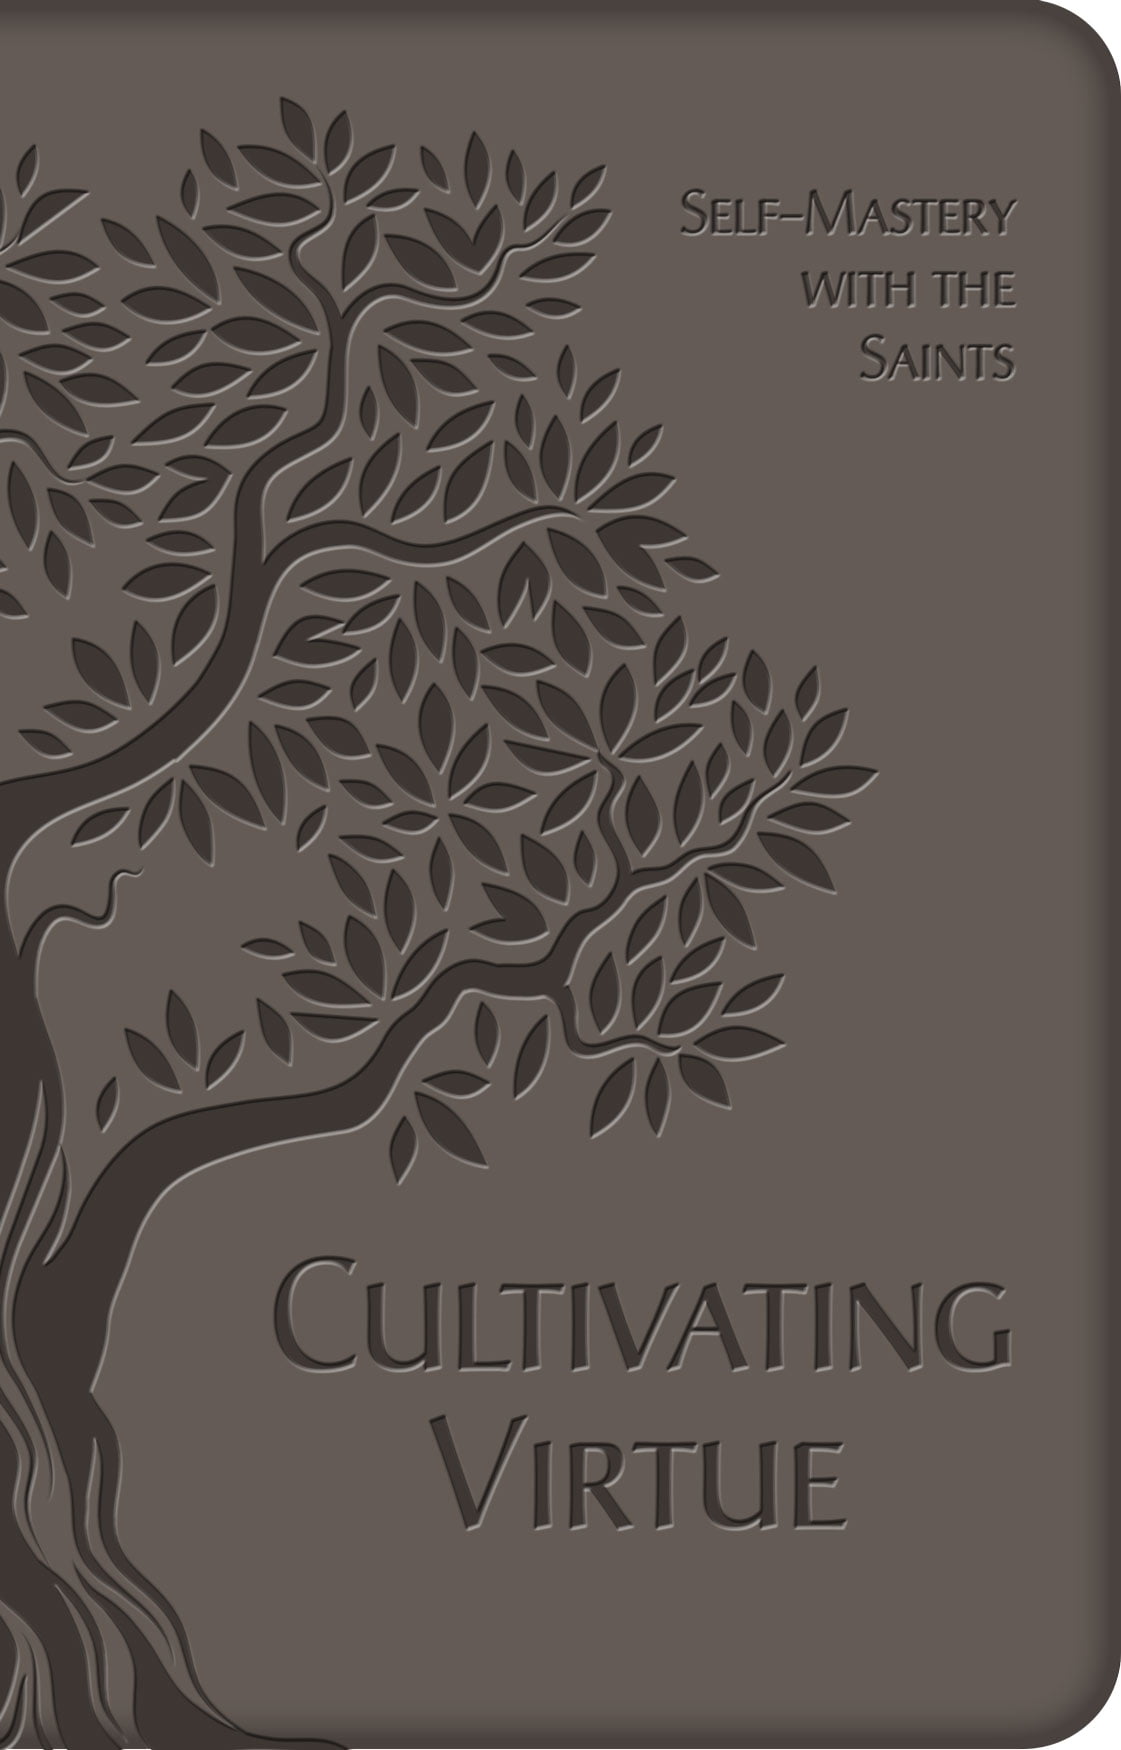 Cultivating Virtue : Self-Mastery With the Saints